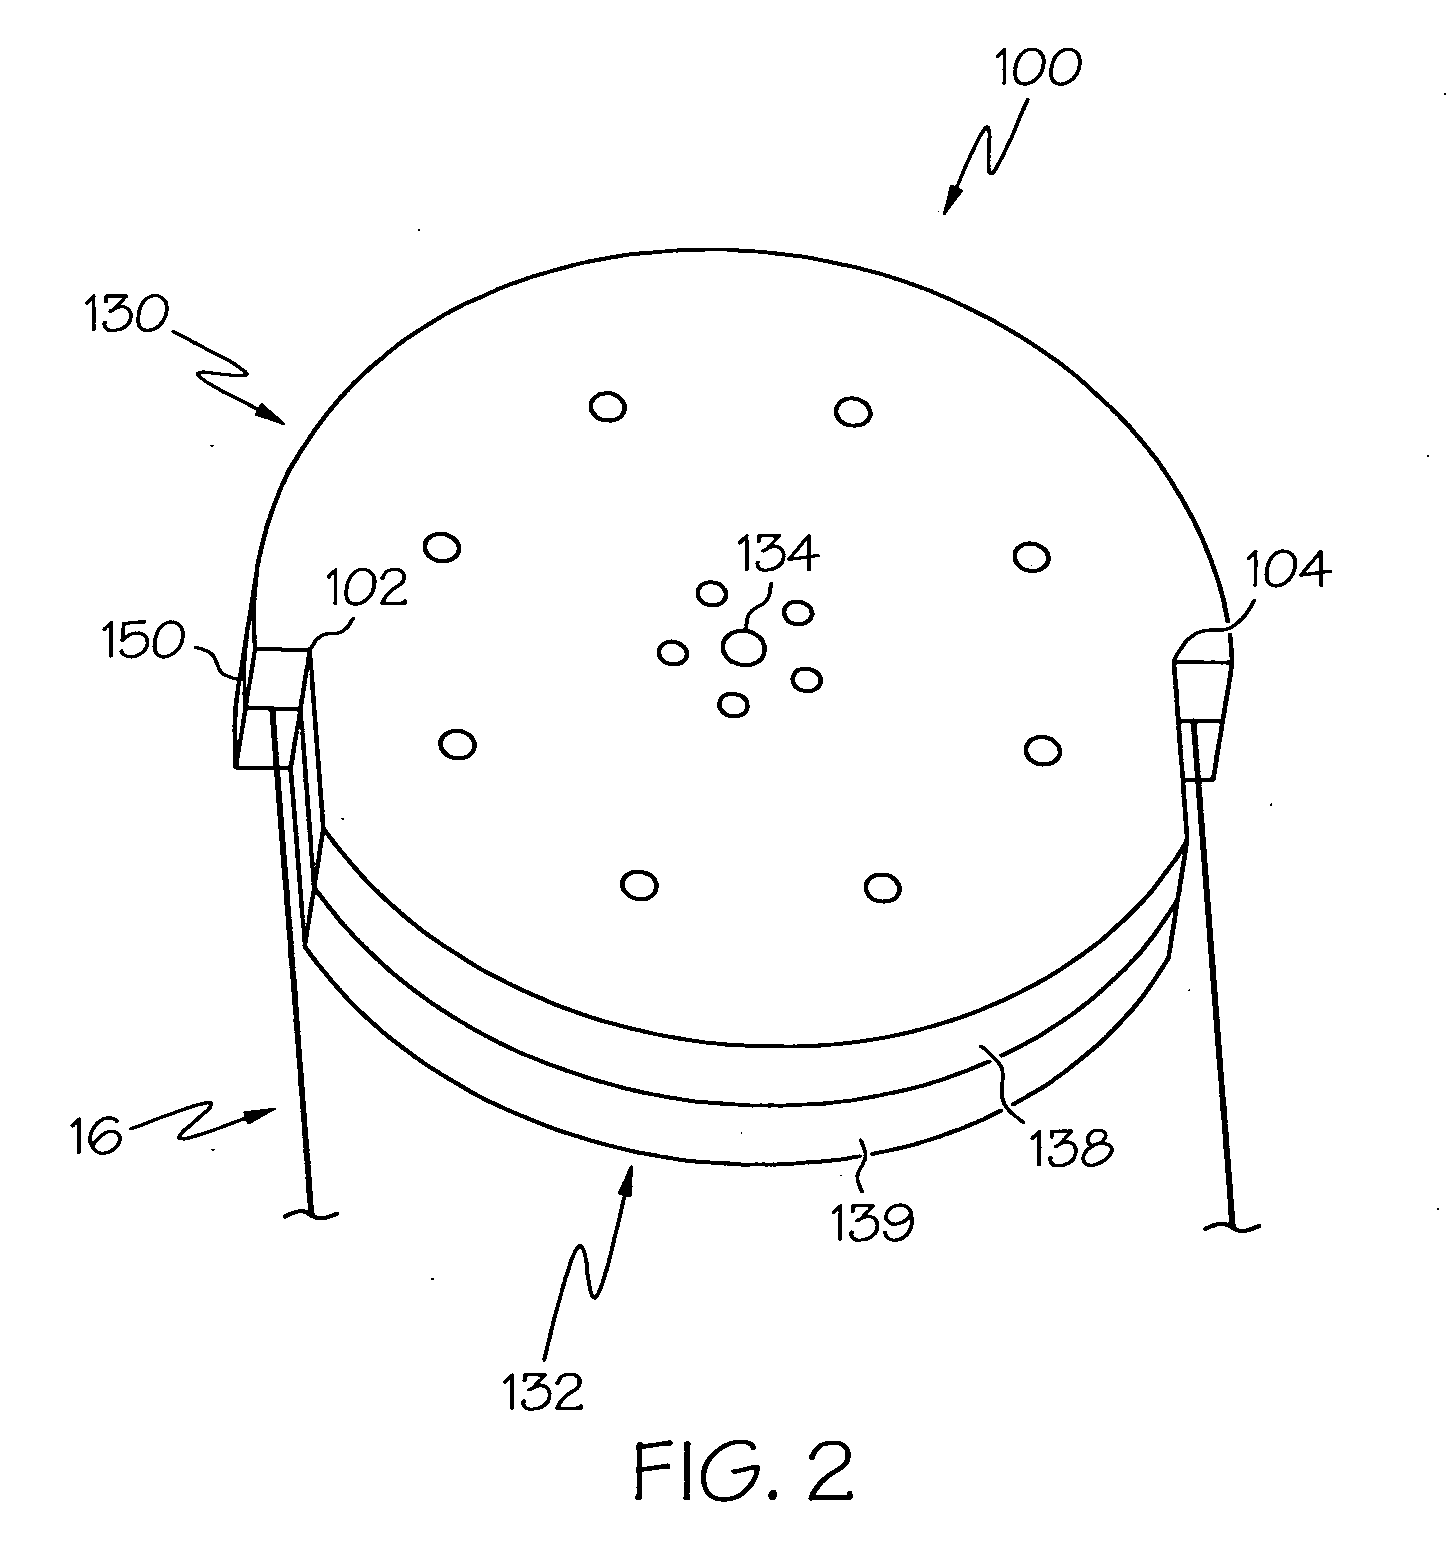 Methods for measuring the tension of optical fibers during manufacture